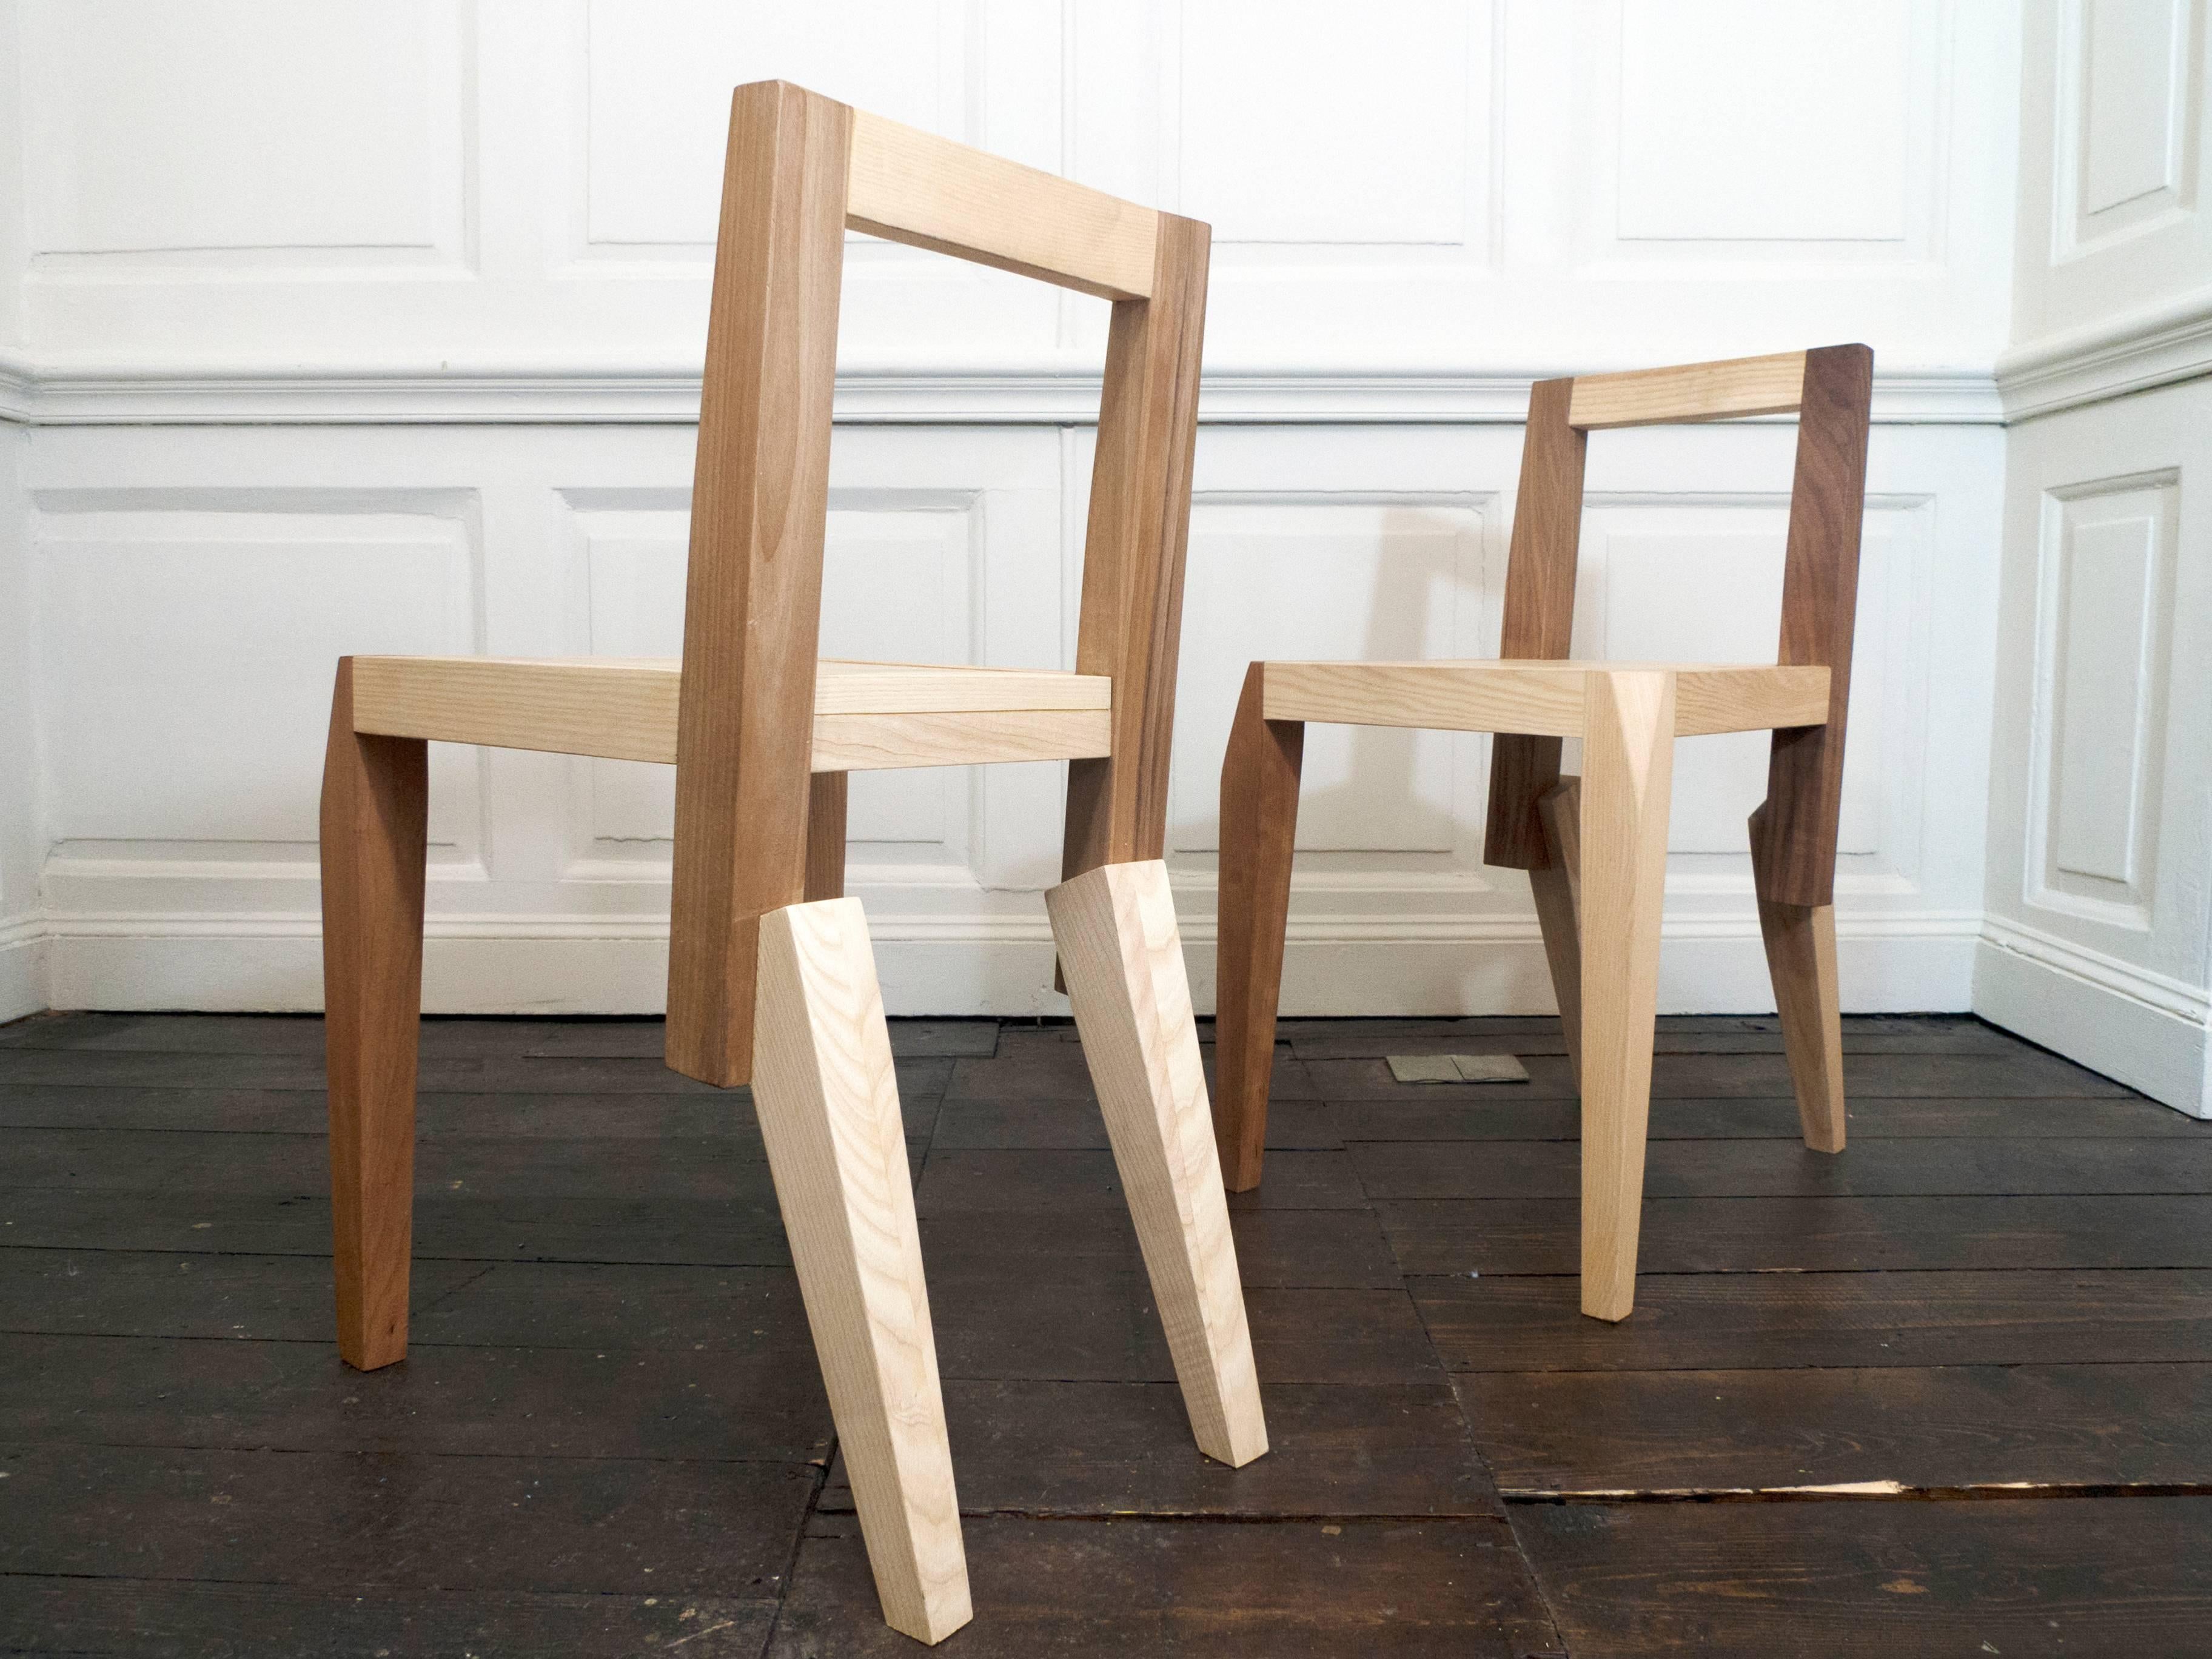 Handmade by Tuscan craftsmen, a solid-wood dining chair that combines a simple rectilinear language with a zoomorphic Silhouette. Thanks to the clever joint used in the rear legs, an animalistic sense of tensile energy gives unique character to the